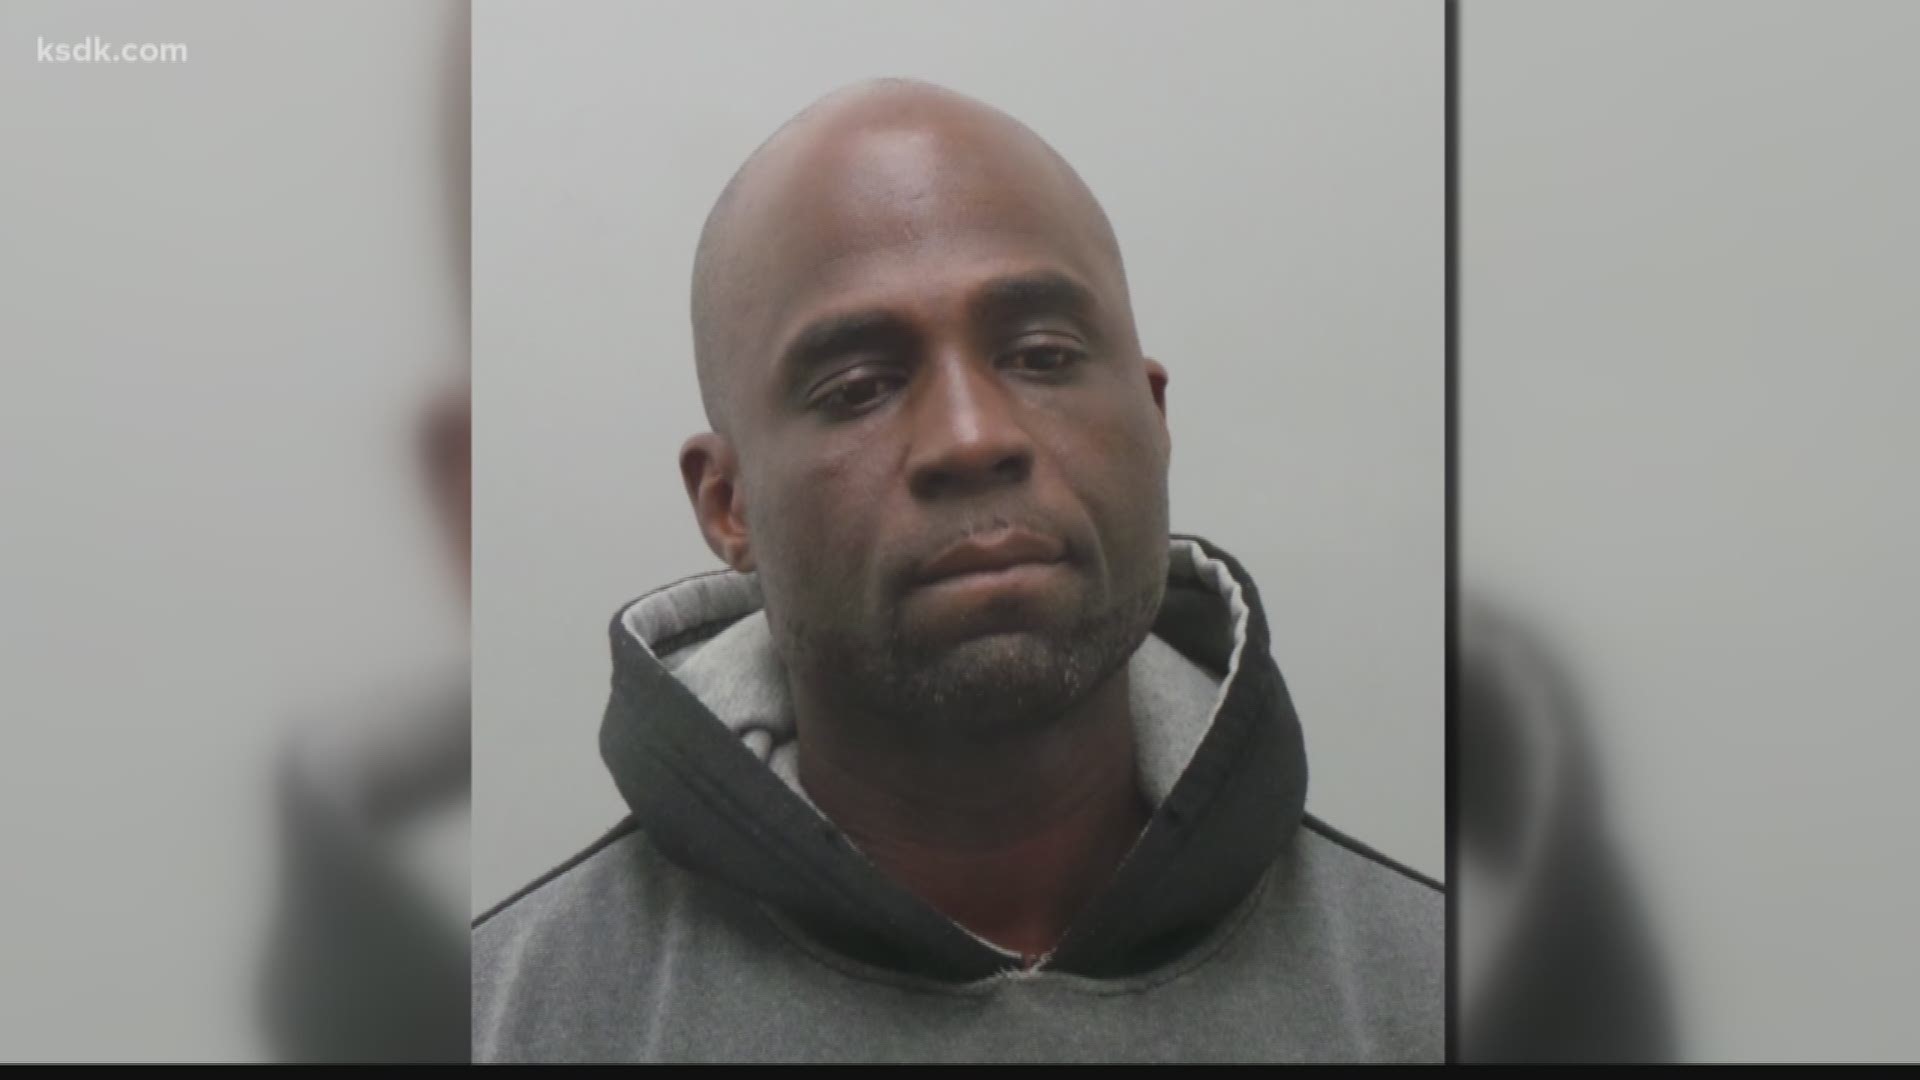 Police say Keith Hill, 42, said the dispute began over money.